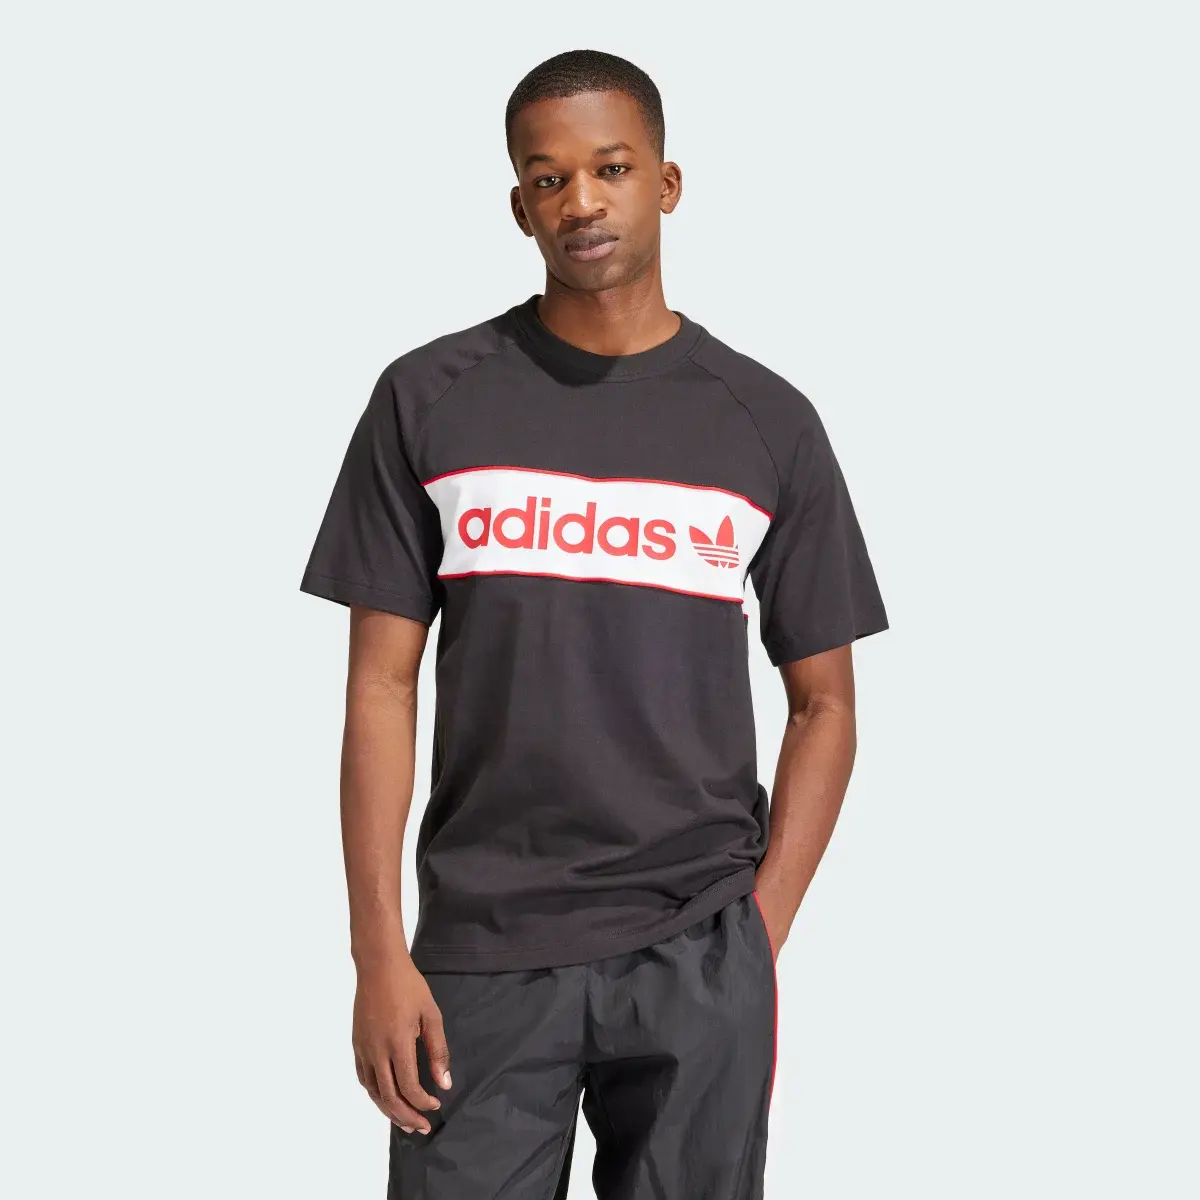 Adidas T-shirt Archive. 2